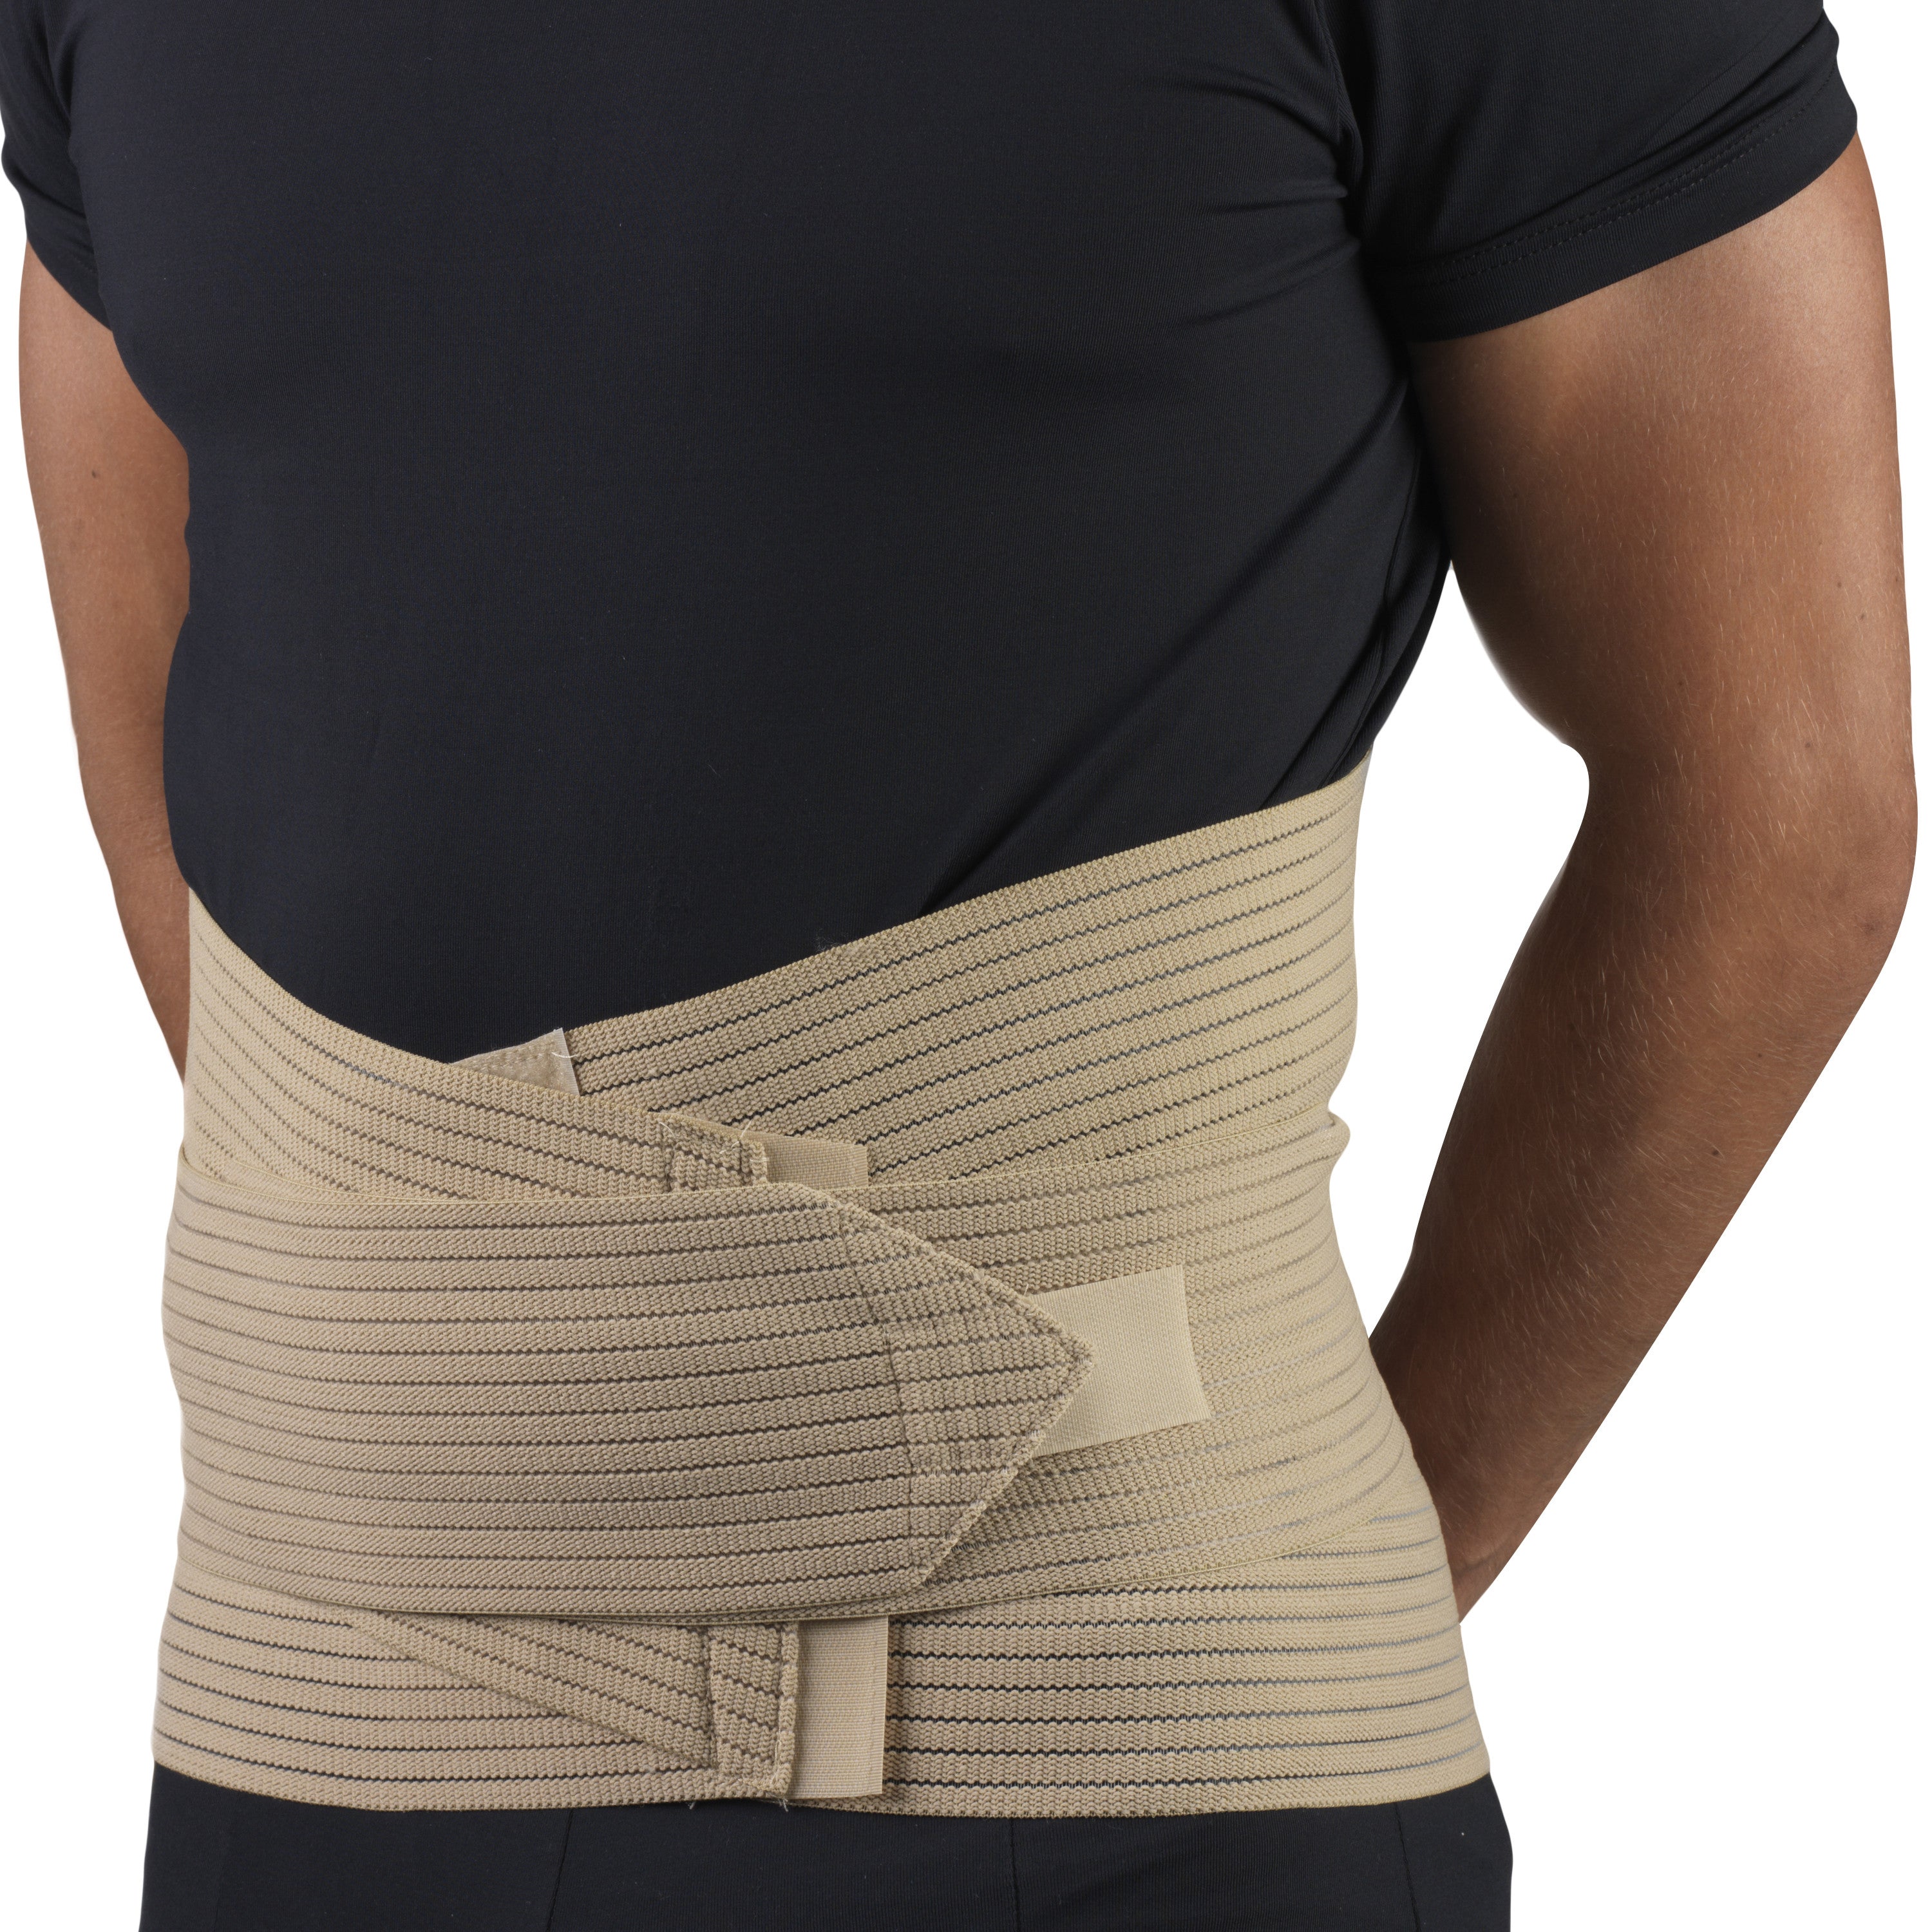 Steel Latex Waist Support Corset For Back Support For Men Slimming